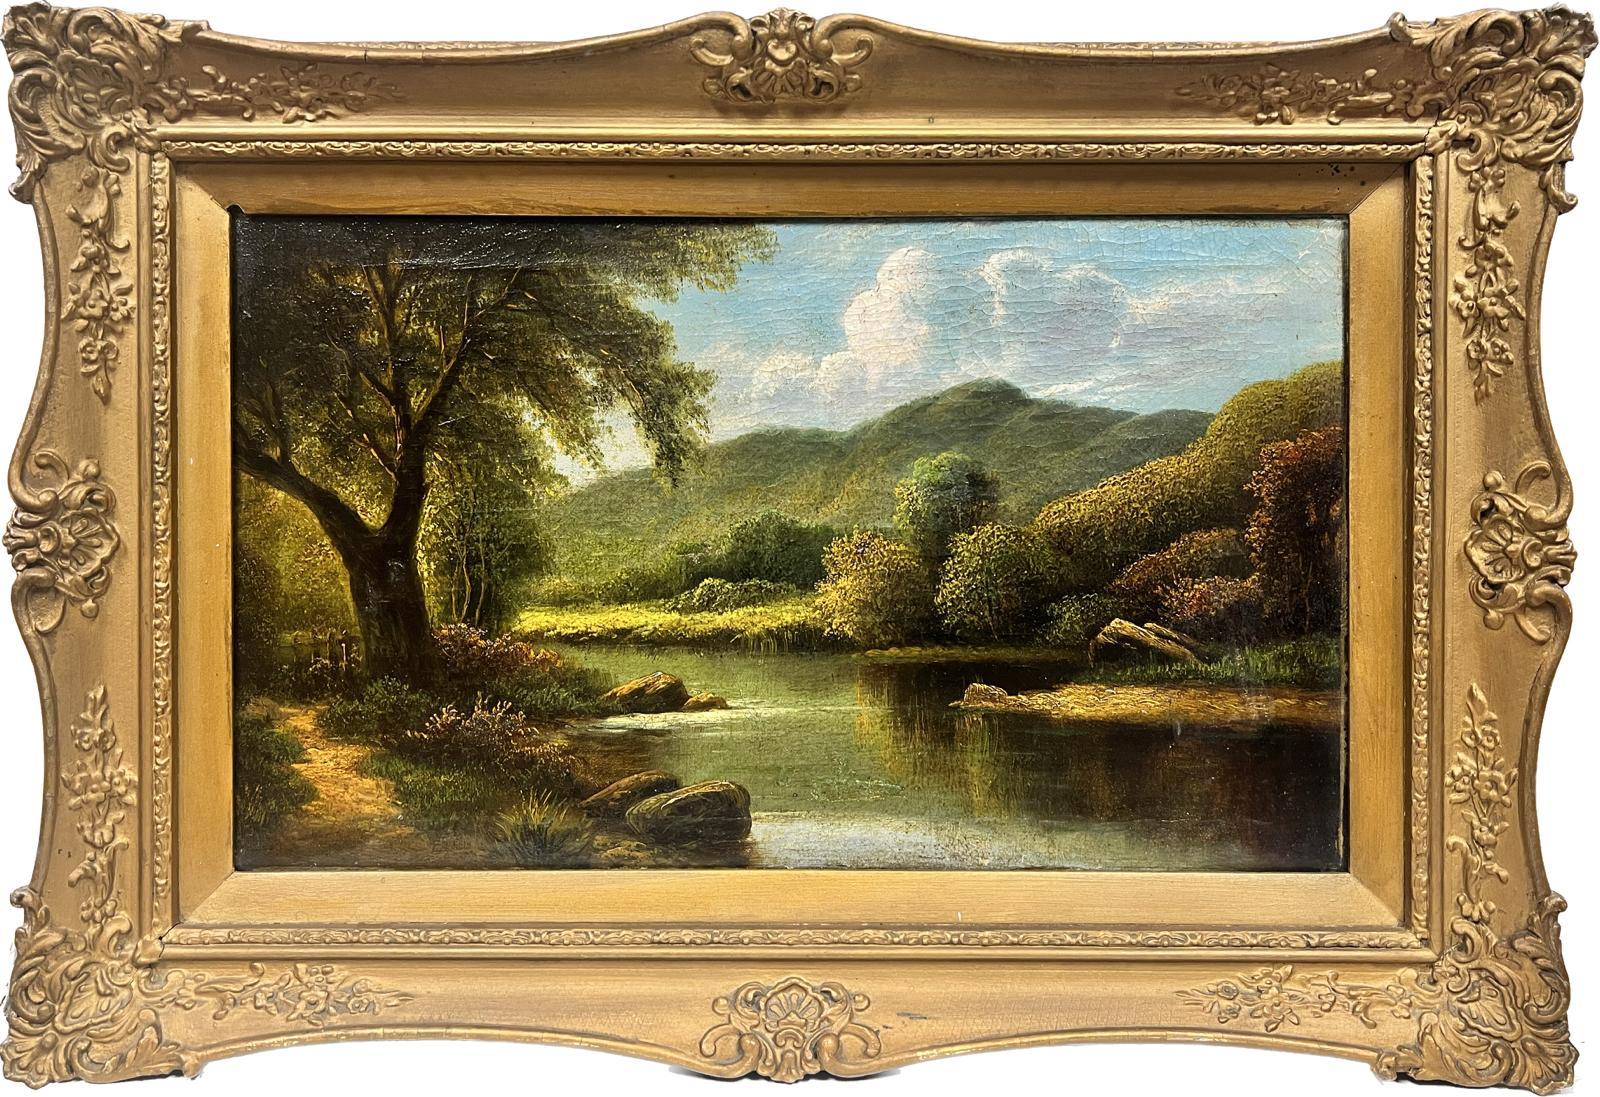 Victorian Oil Landscape Painting - Antique British Oil Painting Tranquil Lake Landscape in Gilt Frame, warm colors